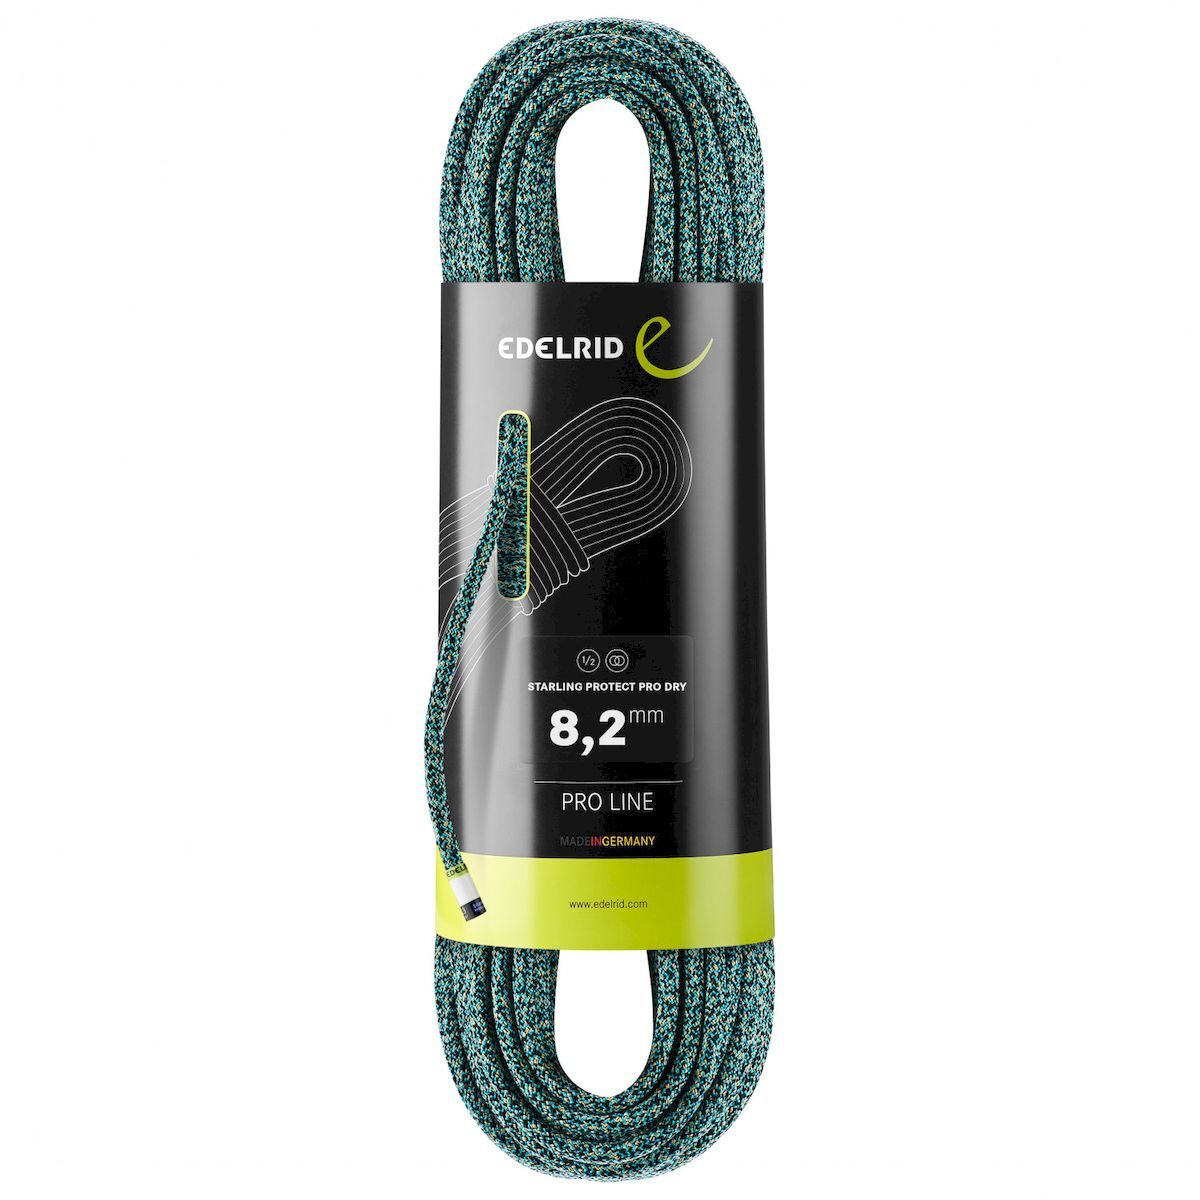 Edelrid Starling Protect Pro Dry 8,2 mm - Cuerda doble